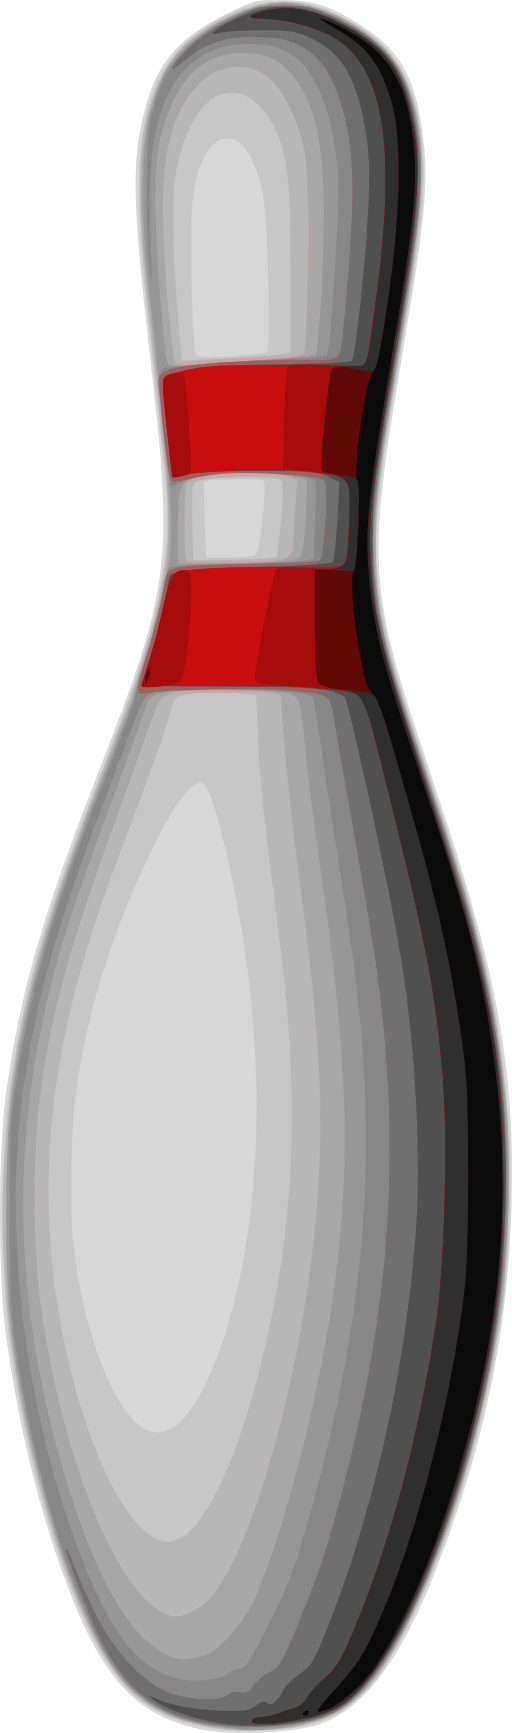 Bowling Pin Clipart Royalty Free Public Domain Clipart - ClipArt ...